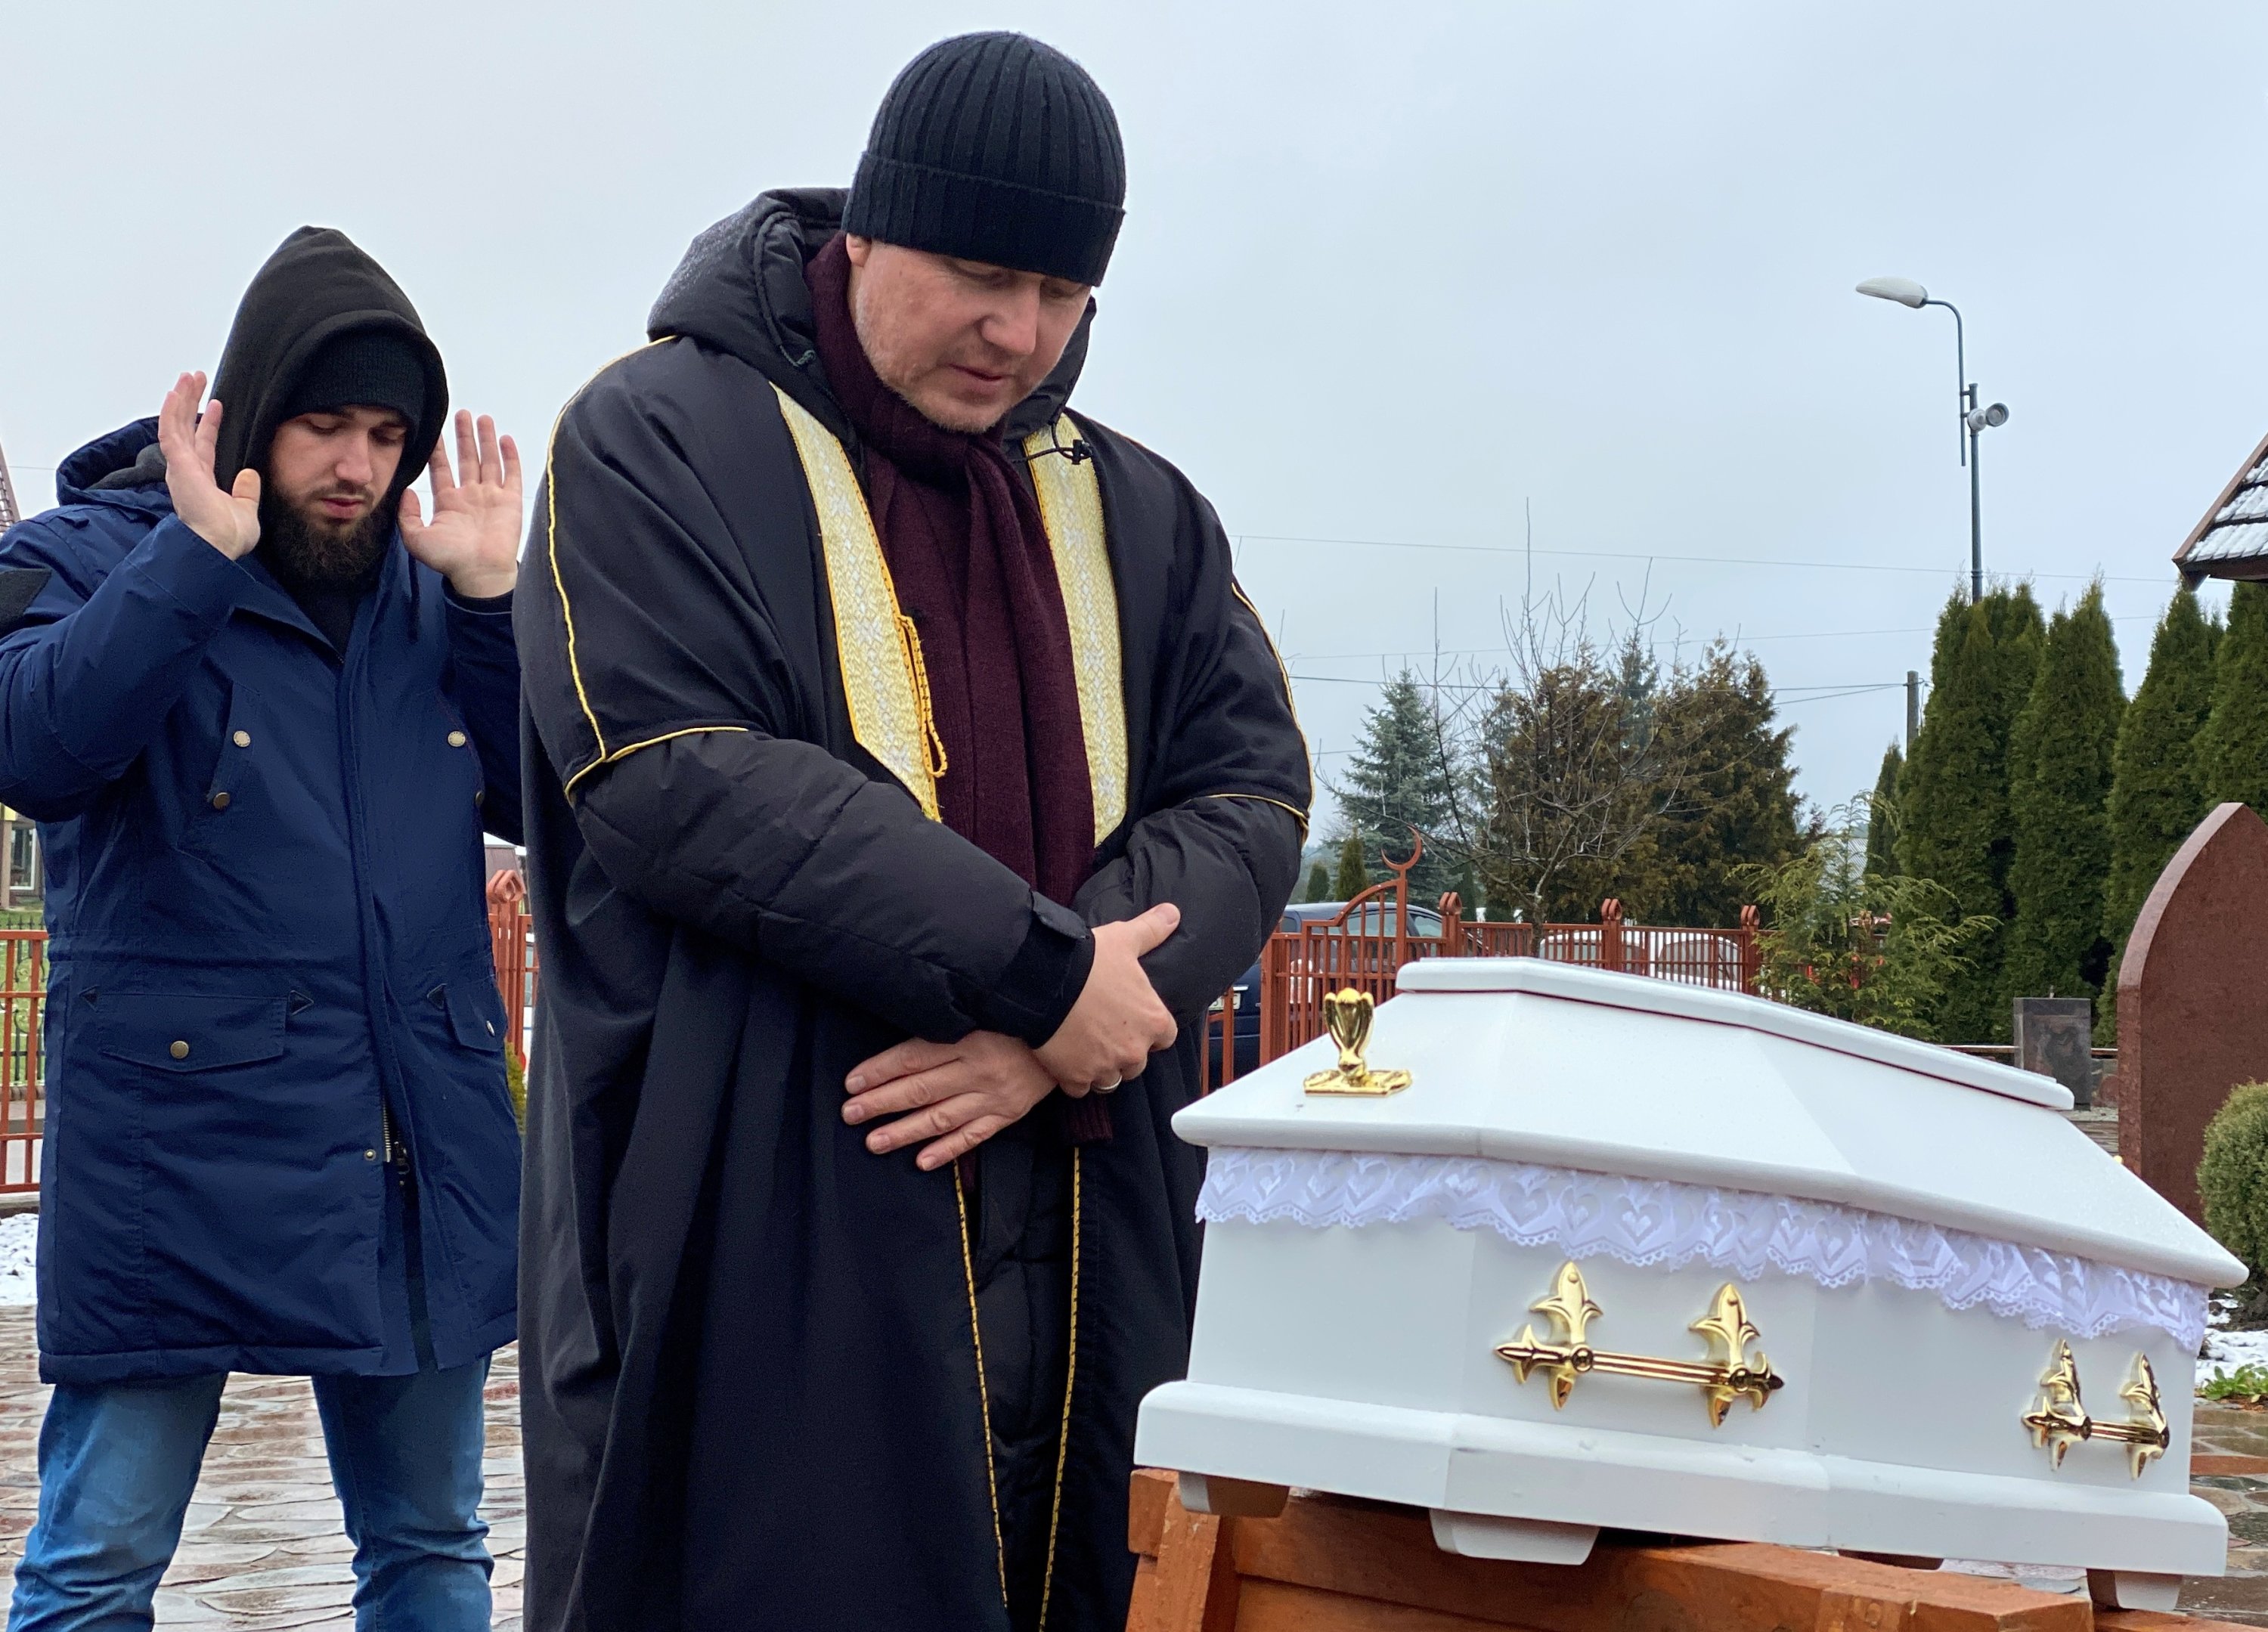 Imam of the village of Bohoniki Aleksander Bazarewicz and a member of the Polish Muslim community attend a funeral of an unborn child Halikari Dhaker, who died in the womb of his mother during the migrant crisis at the Belarusian-Polish border, at a cemetery in the village of Bohoniki near Sokolka, Poland, Nov. 23, 2021. (Reuters Photo)